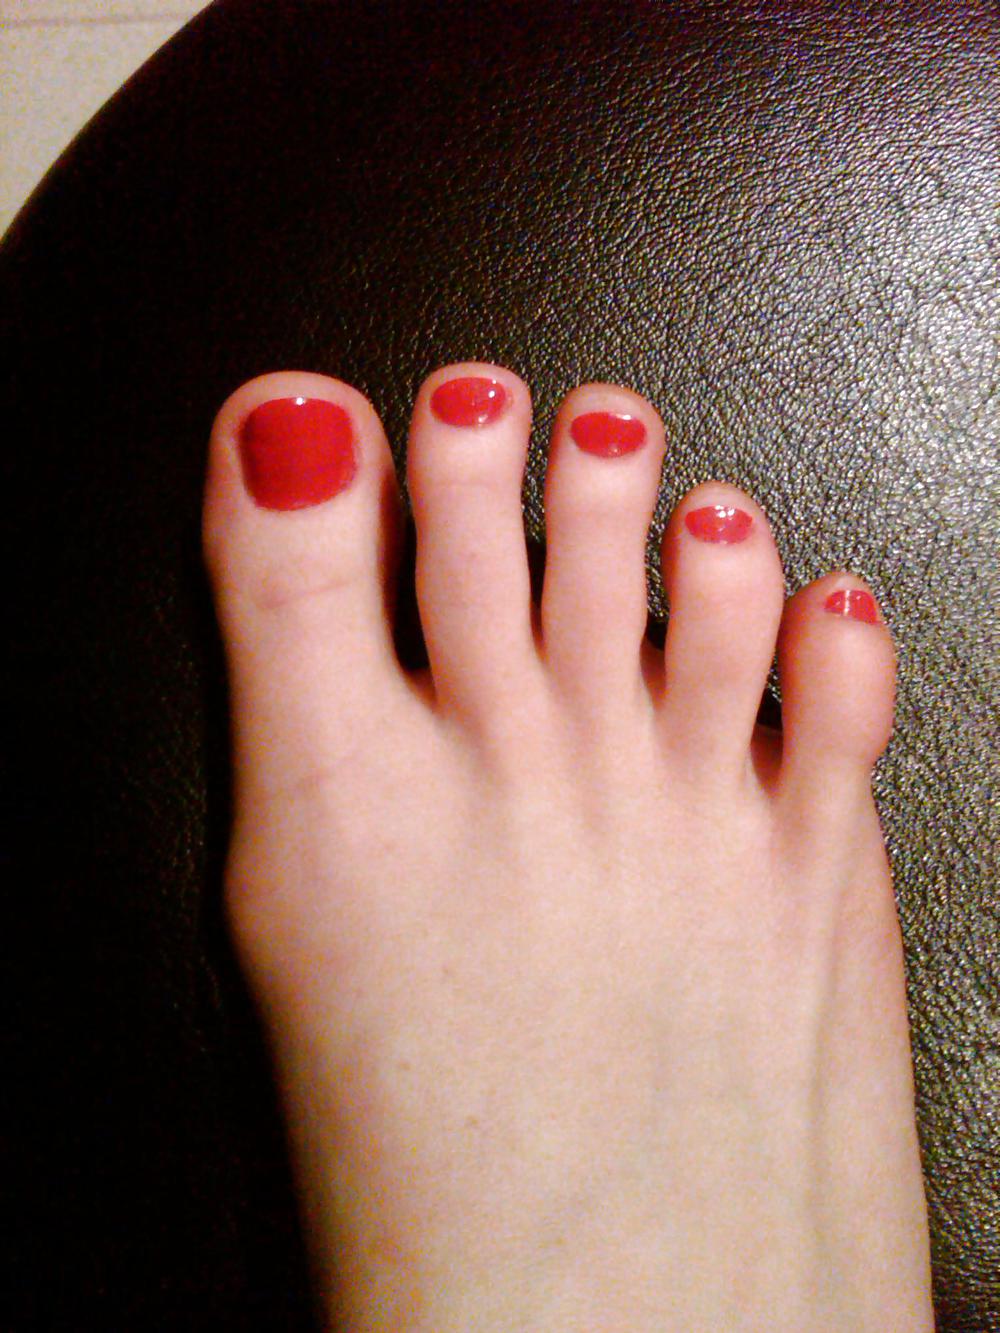 My redhead friend's feet and toes  #14029003